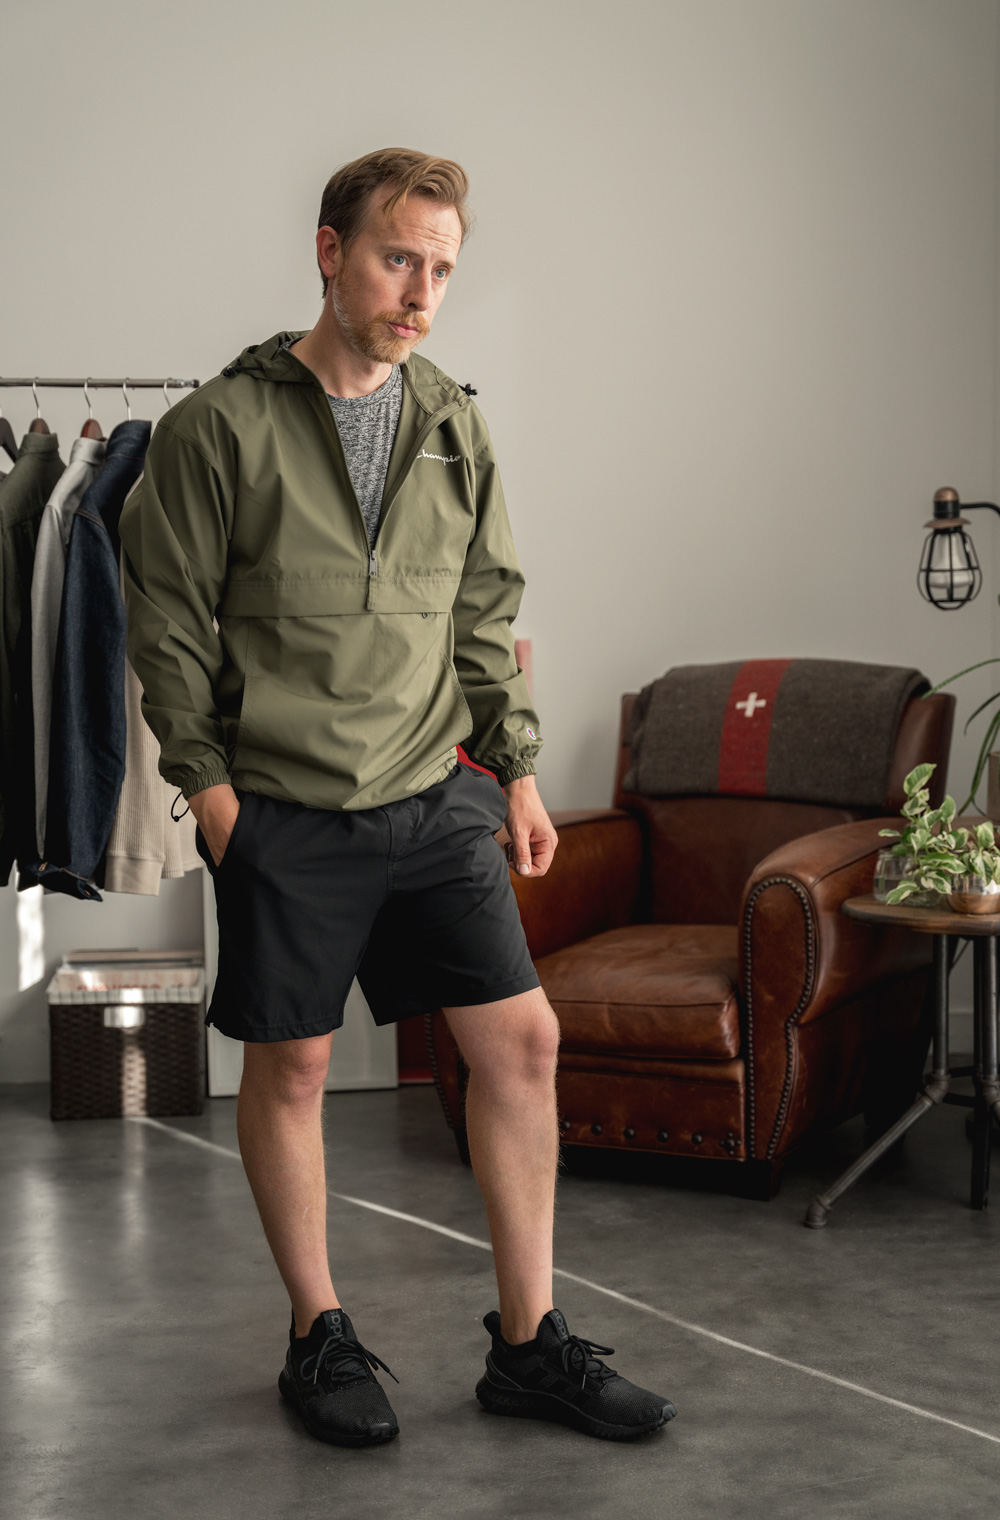 modern gym outfit with green parka, gray performance shirt, black exercise shorts, and black Adidas sneakers